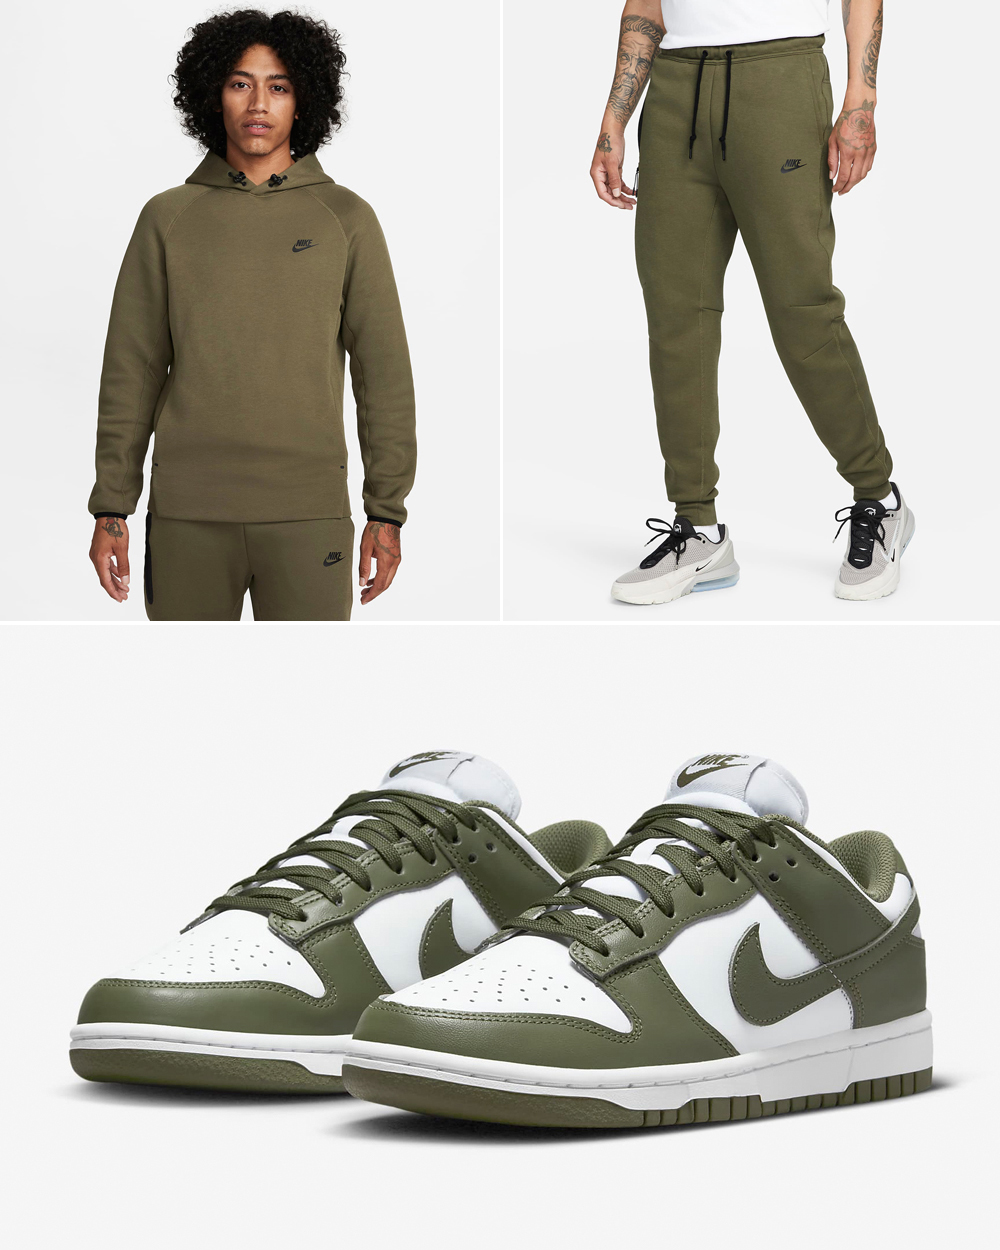 Nike-Dunk-Low-Medium-Olive-Outfits-2